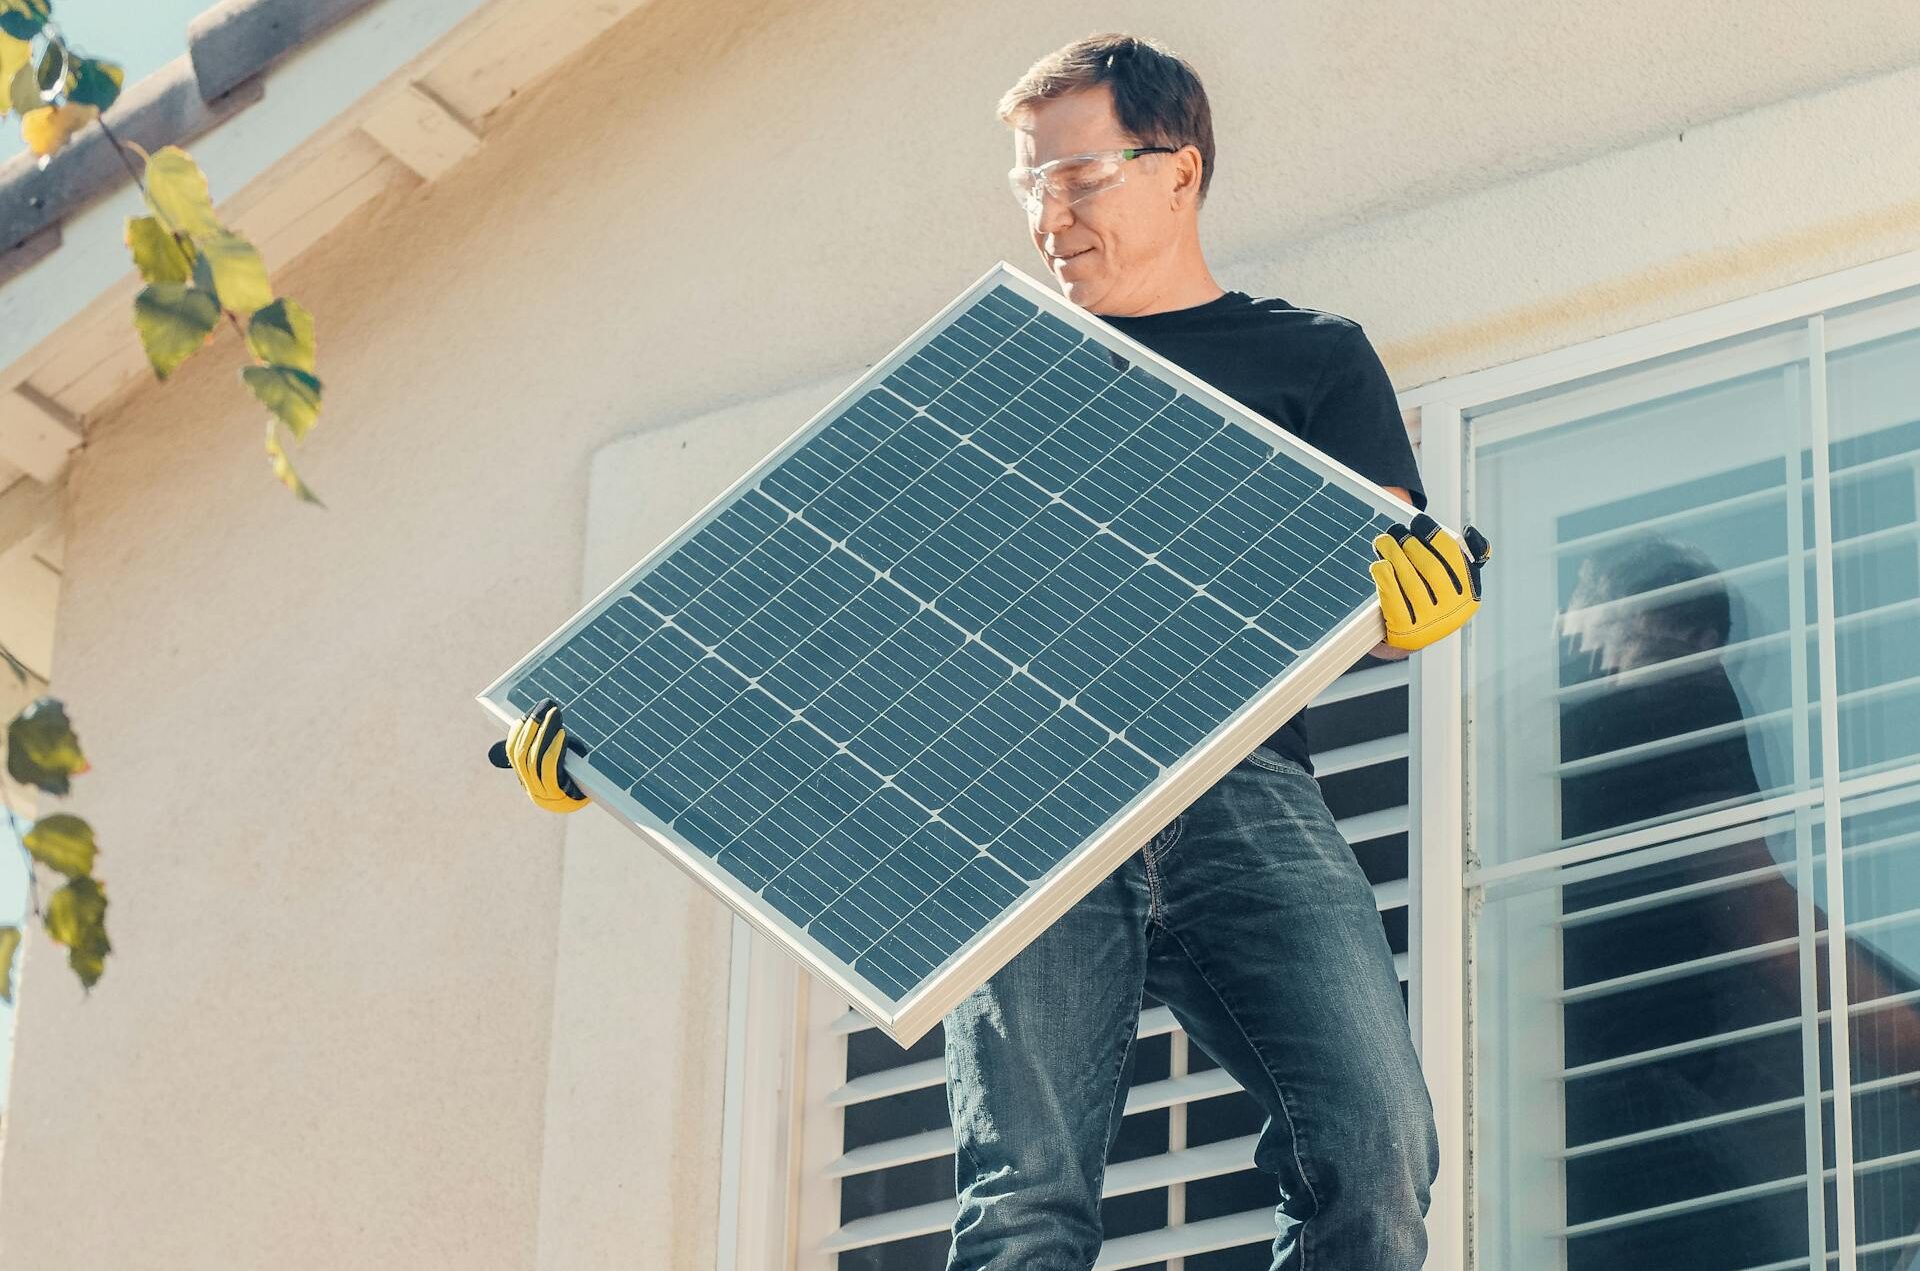 Photo of a man on a tile roof holding a solar panel to install solar energy on his home.